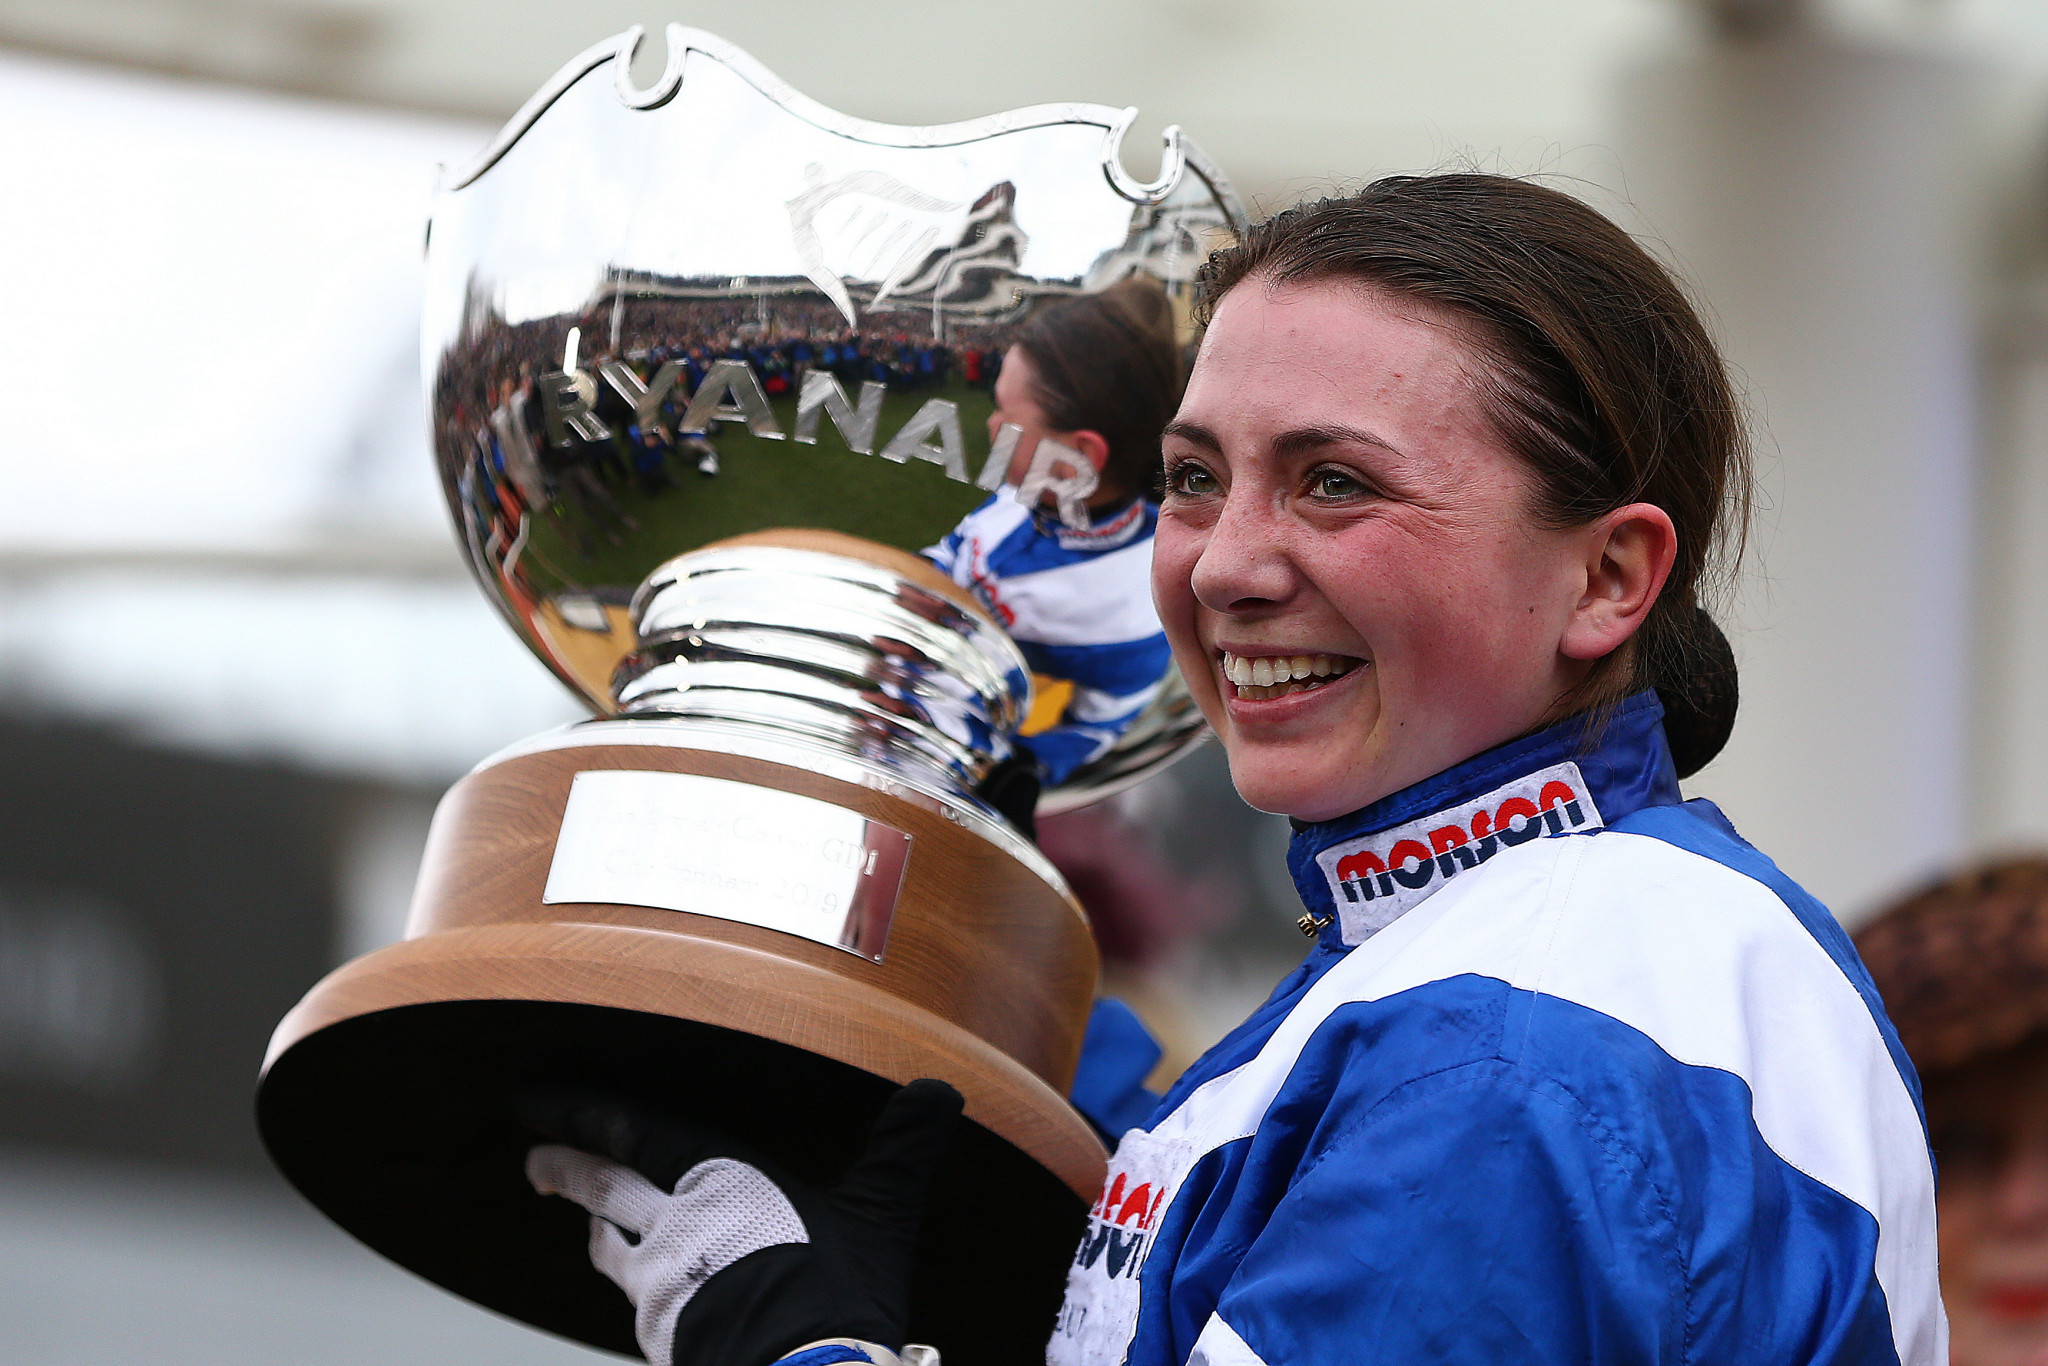 Jockey Bryony Frost poses with the trophy after she rides Frodon to victory during the Ryanair Chase ©Getty Images